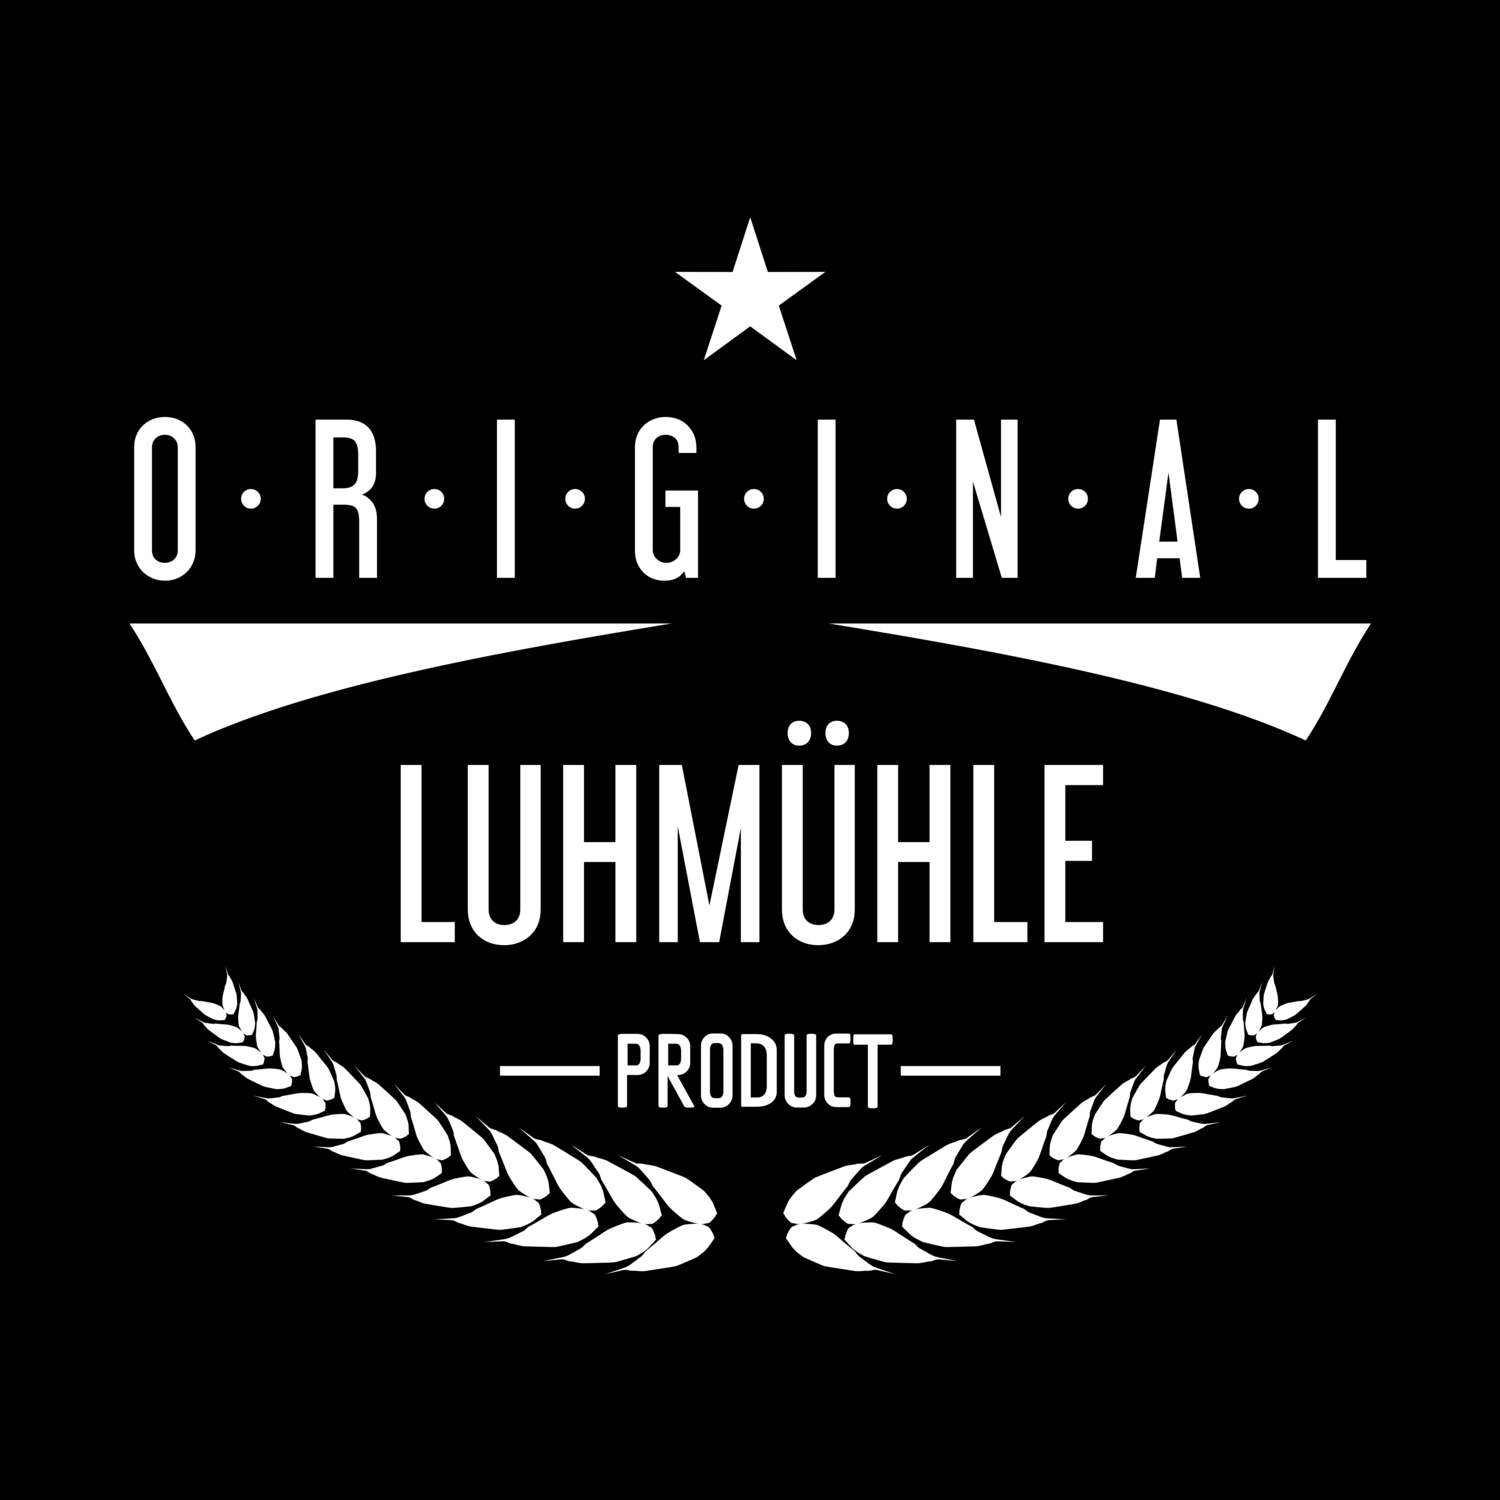 Luhmühle T-Shirt »Original Product«